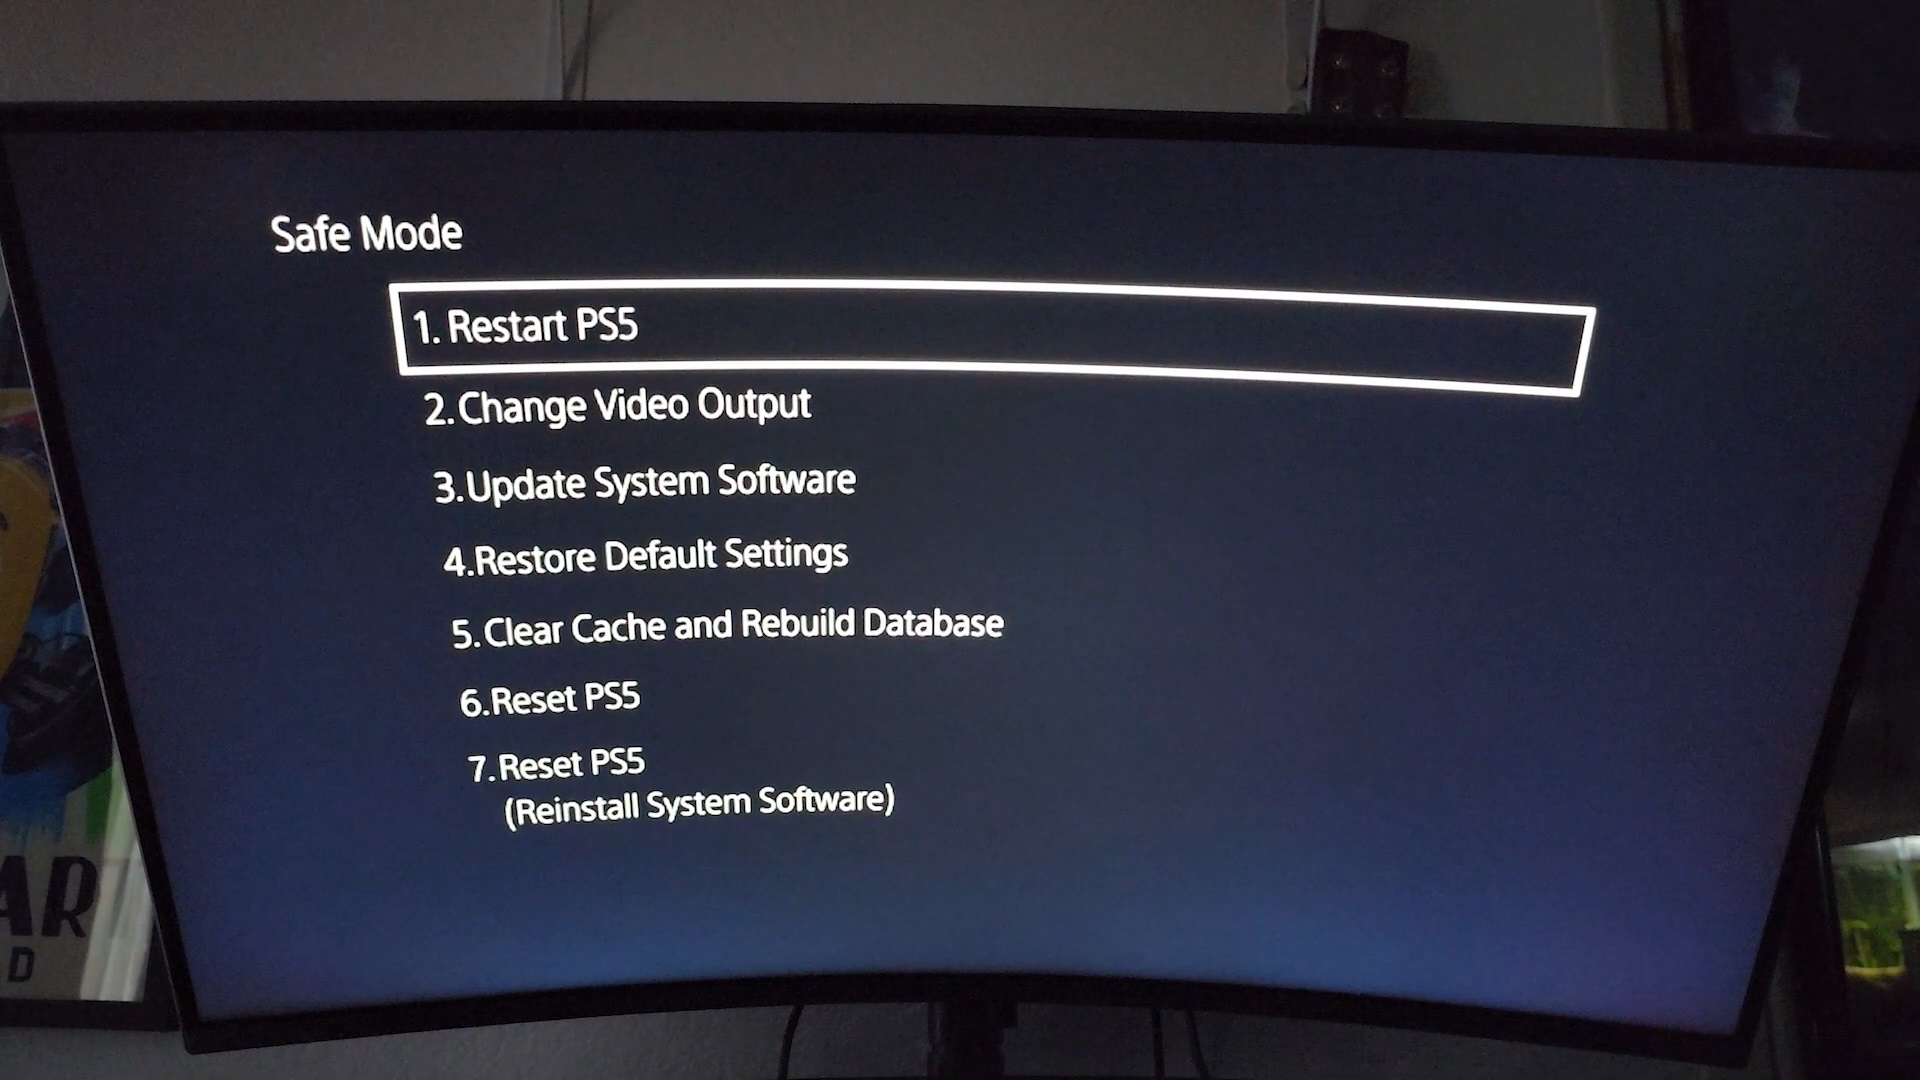 Sony PS5 Safe Mode Is it useless - Functions